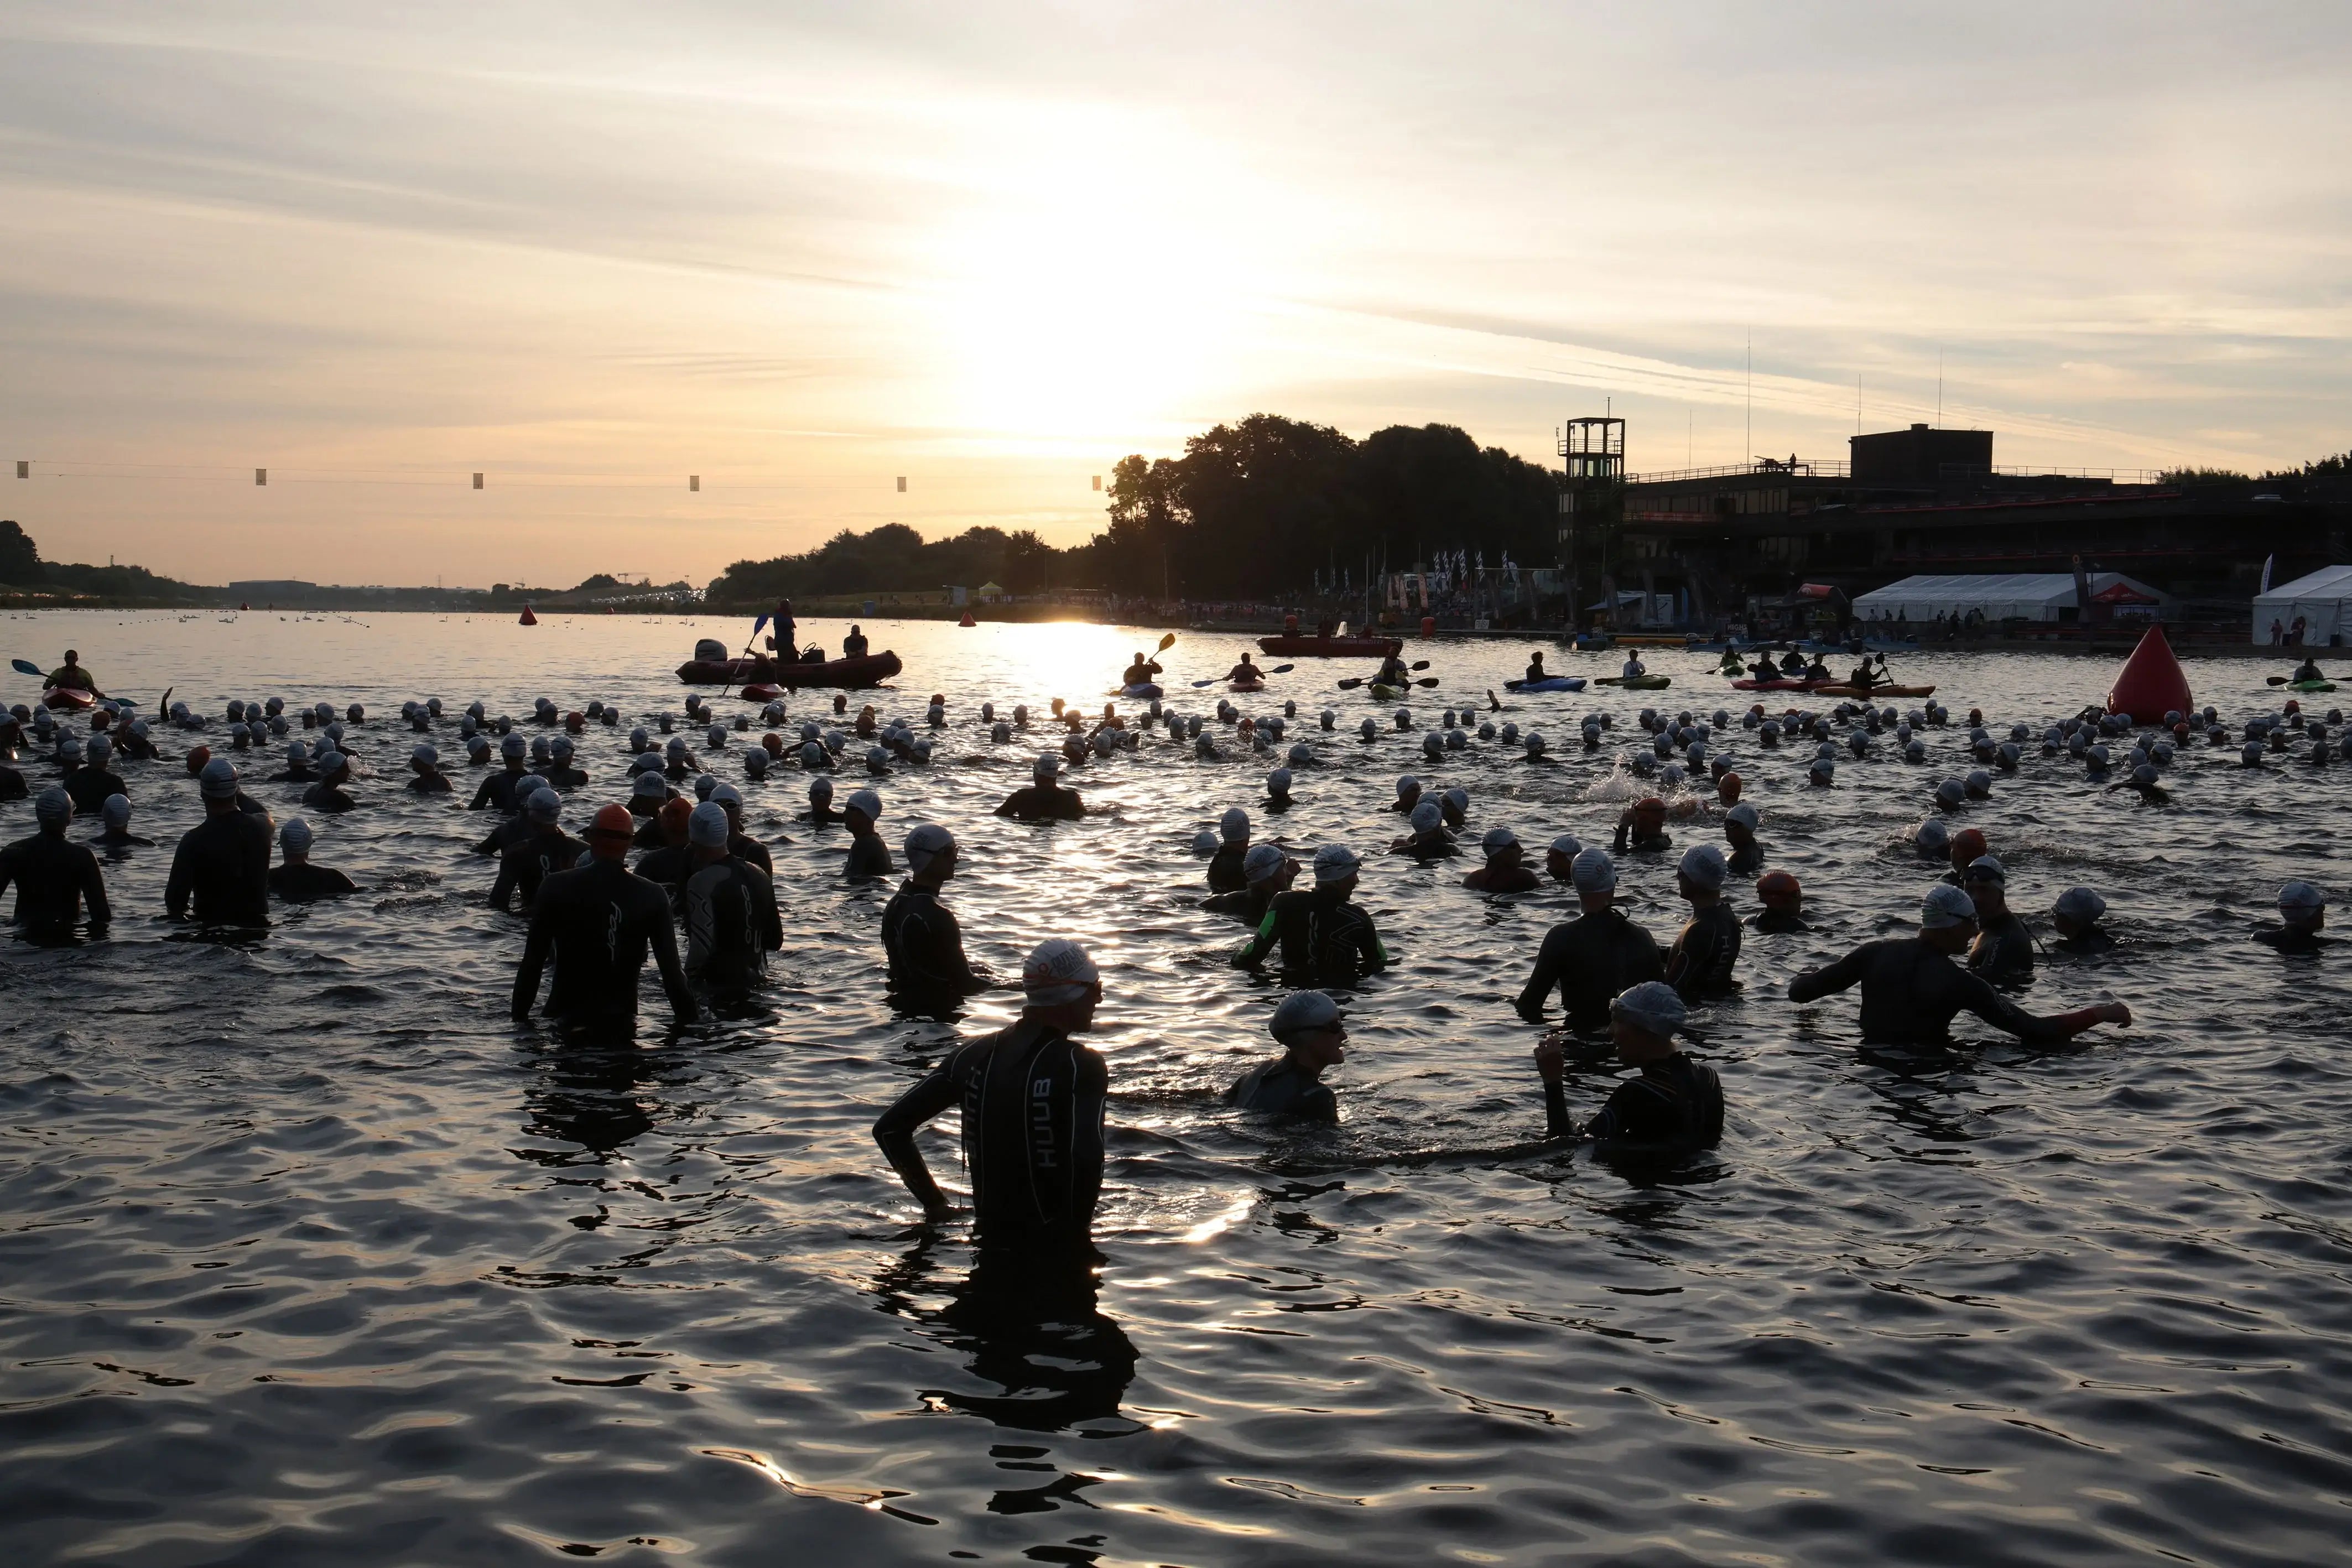 Top tips for preparing for an IRONMAN (last 4-6 weeks)